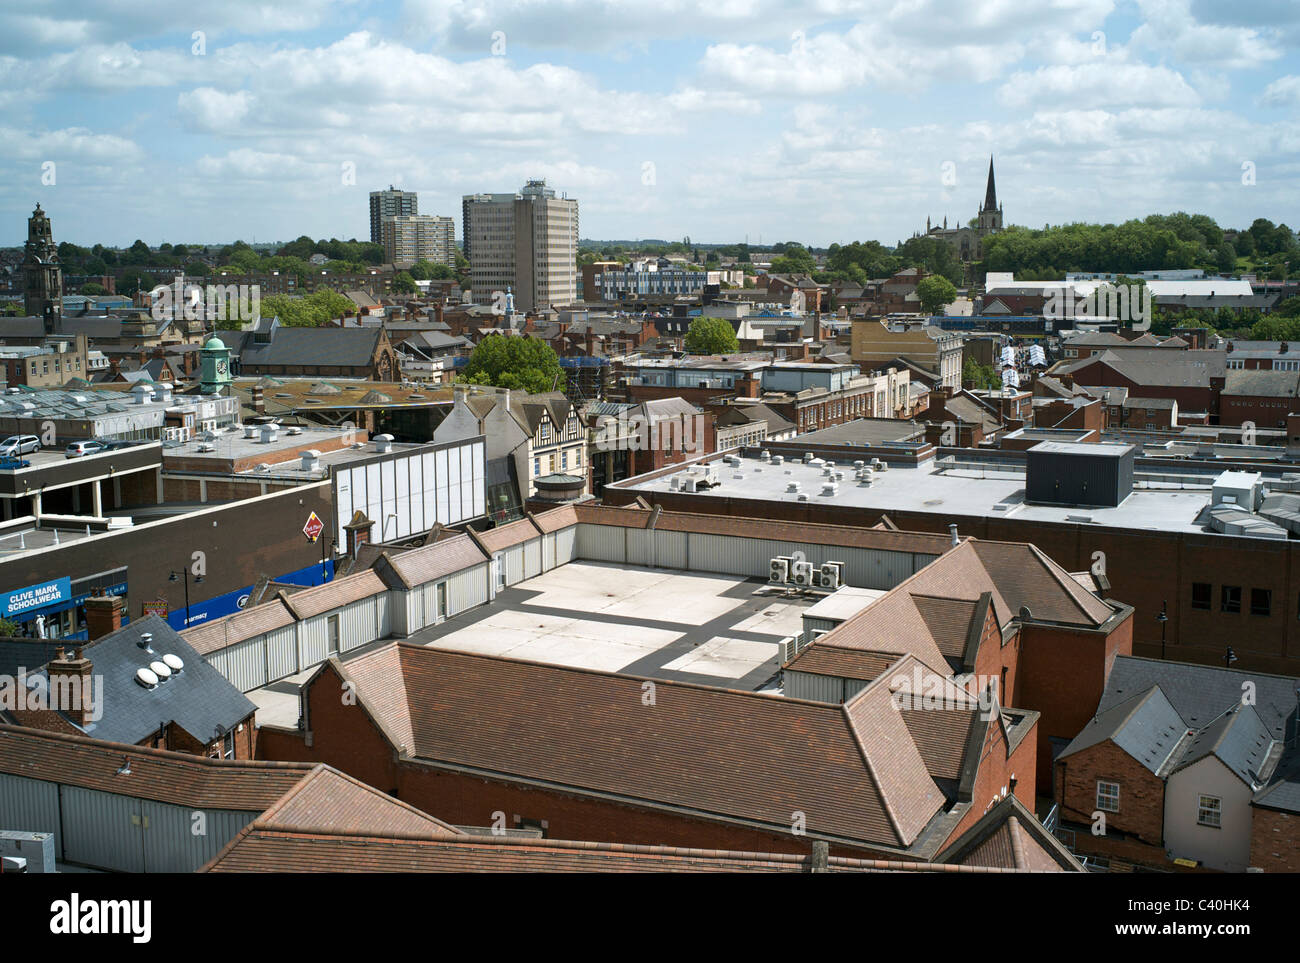 Walsall Town Center. Foto Stock